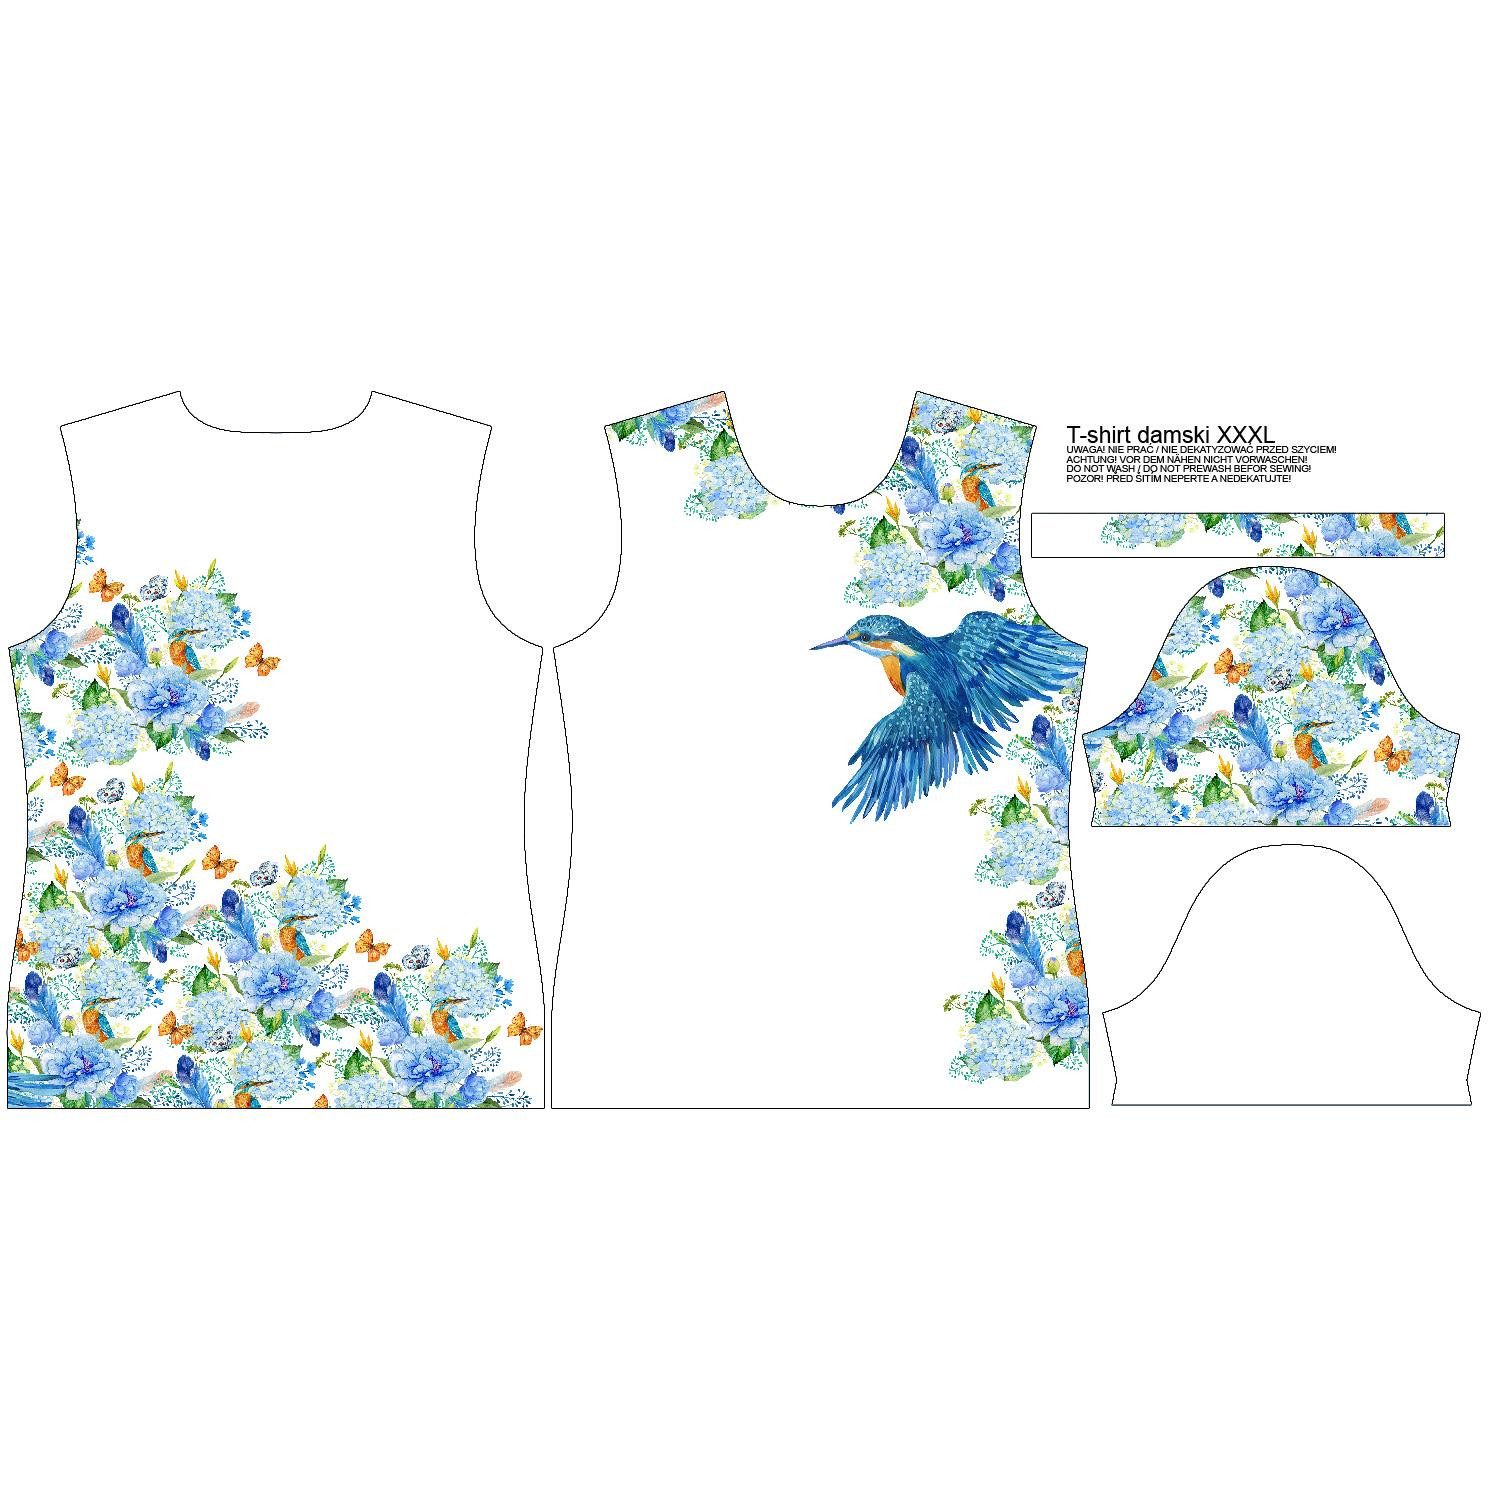 WOMEN’S T-SHIRT - KINGFISHERS AND LILACS (KINGFISHERS IN THE MEADOW) / white - single jersey